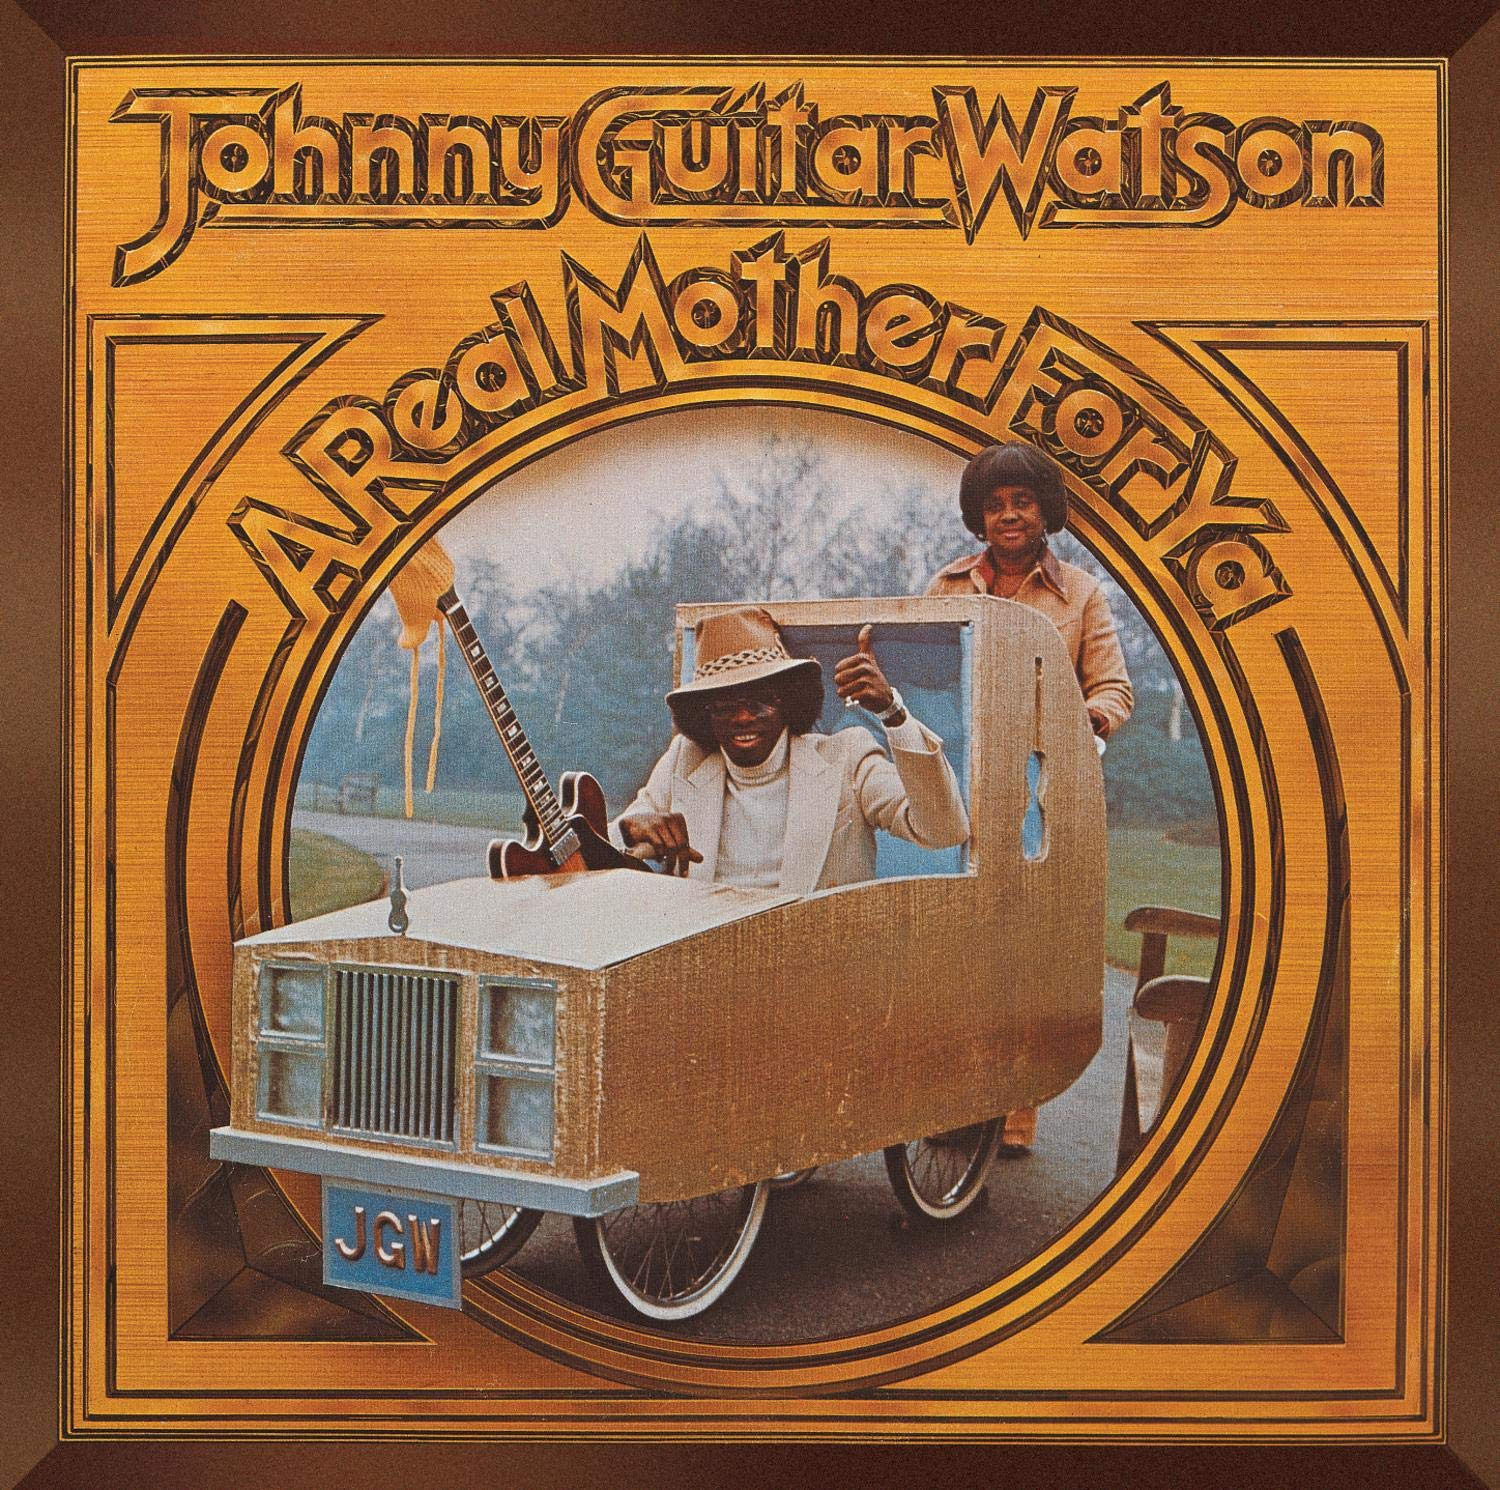 Johnny "Guitar" Watson - "A Real Mother For Ya" vinyl LP